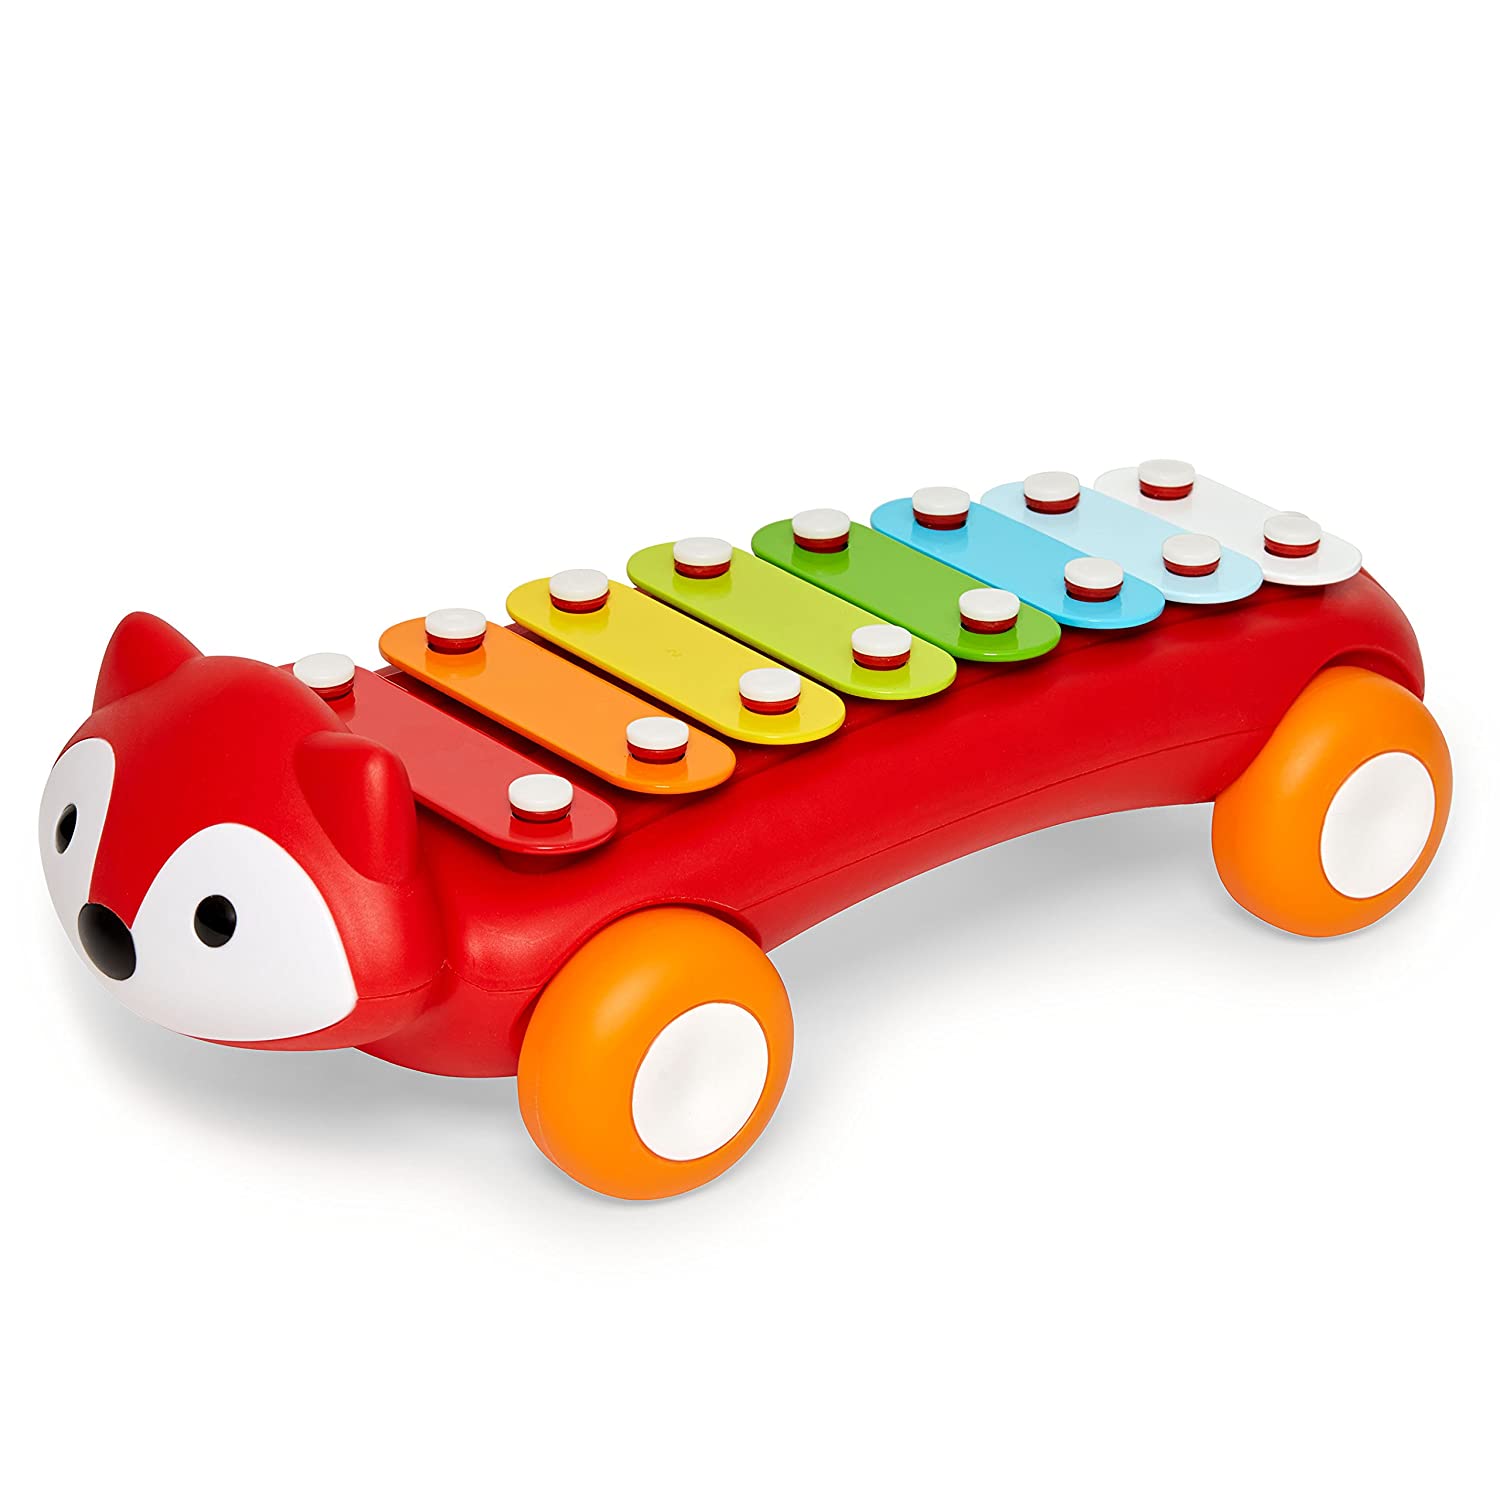 7 Best Babies Xylophone 2022 - Buying Guide & Reviews 4